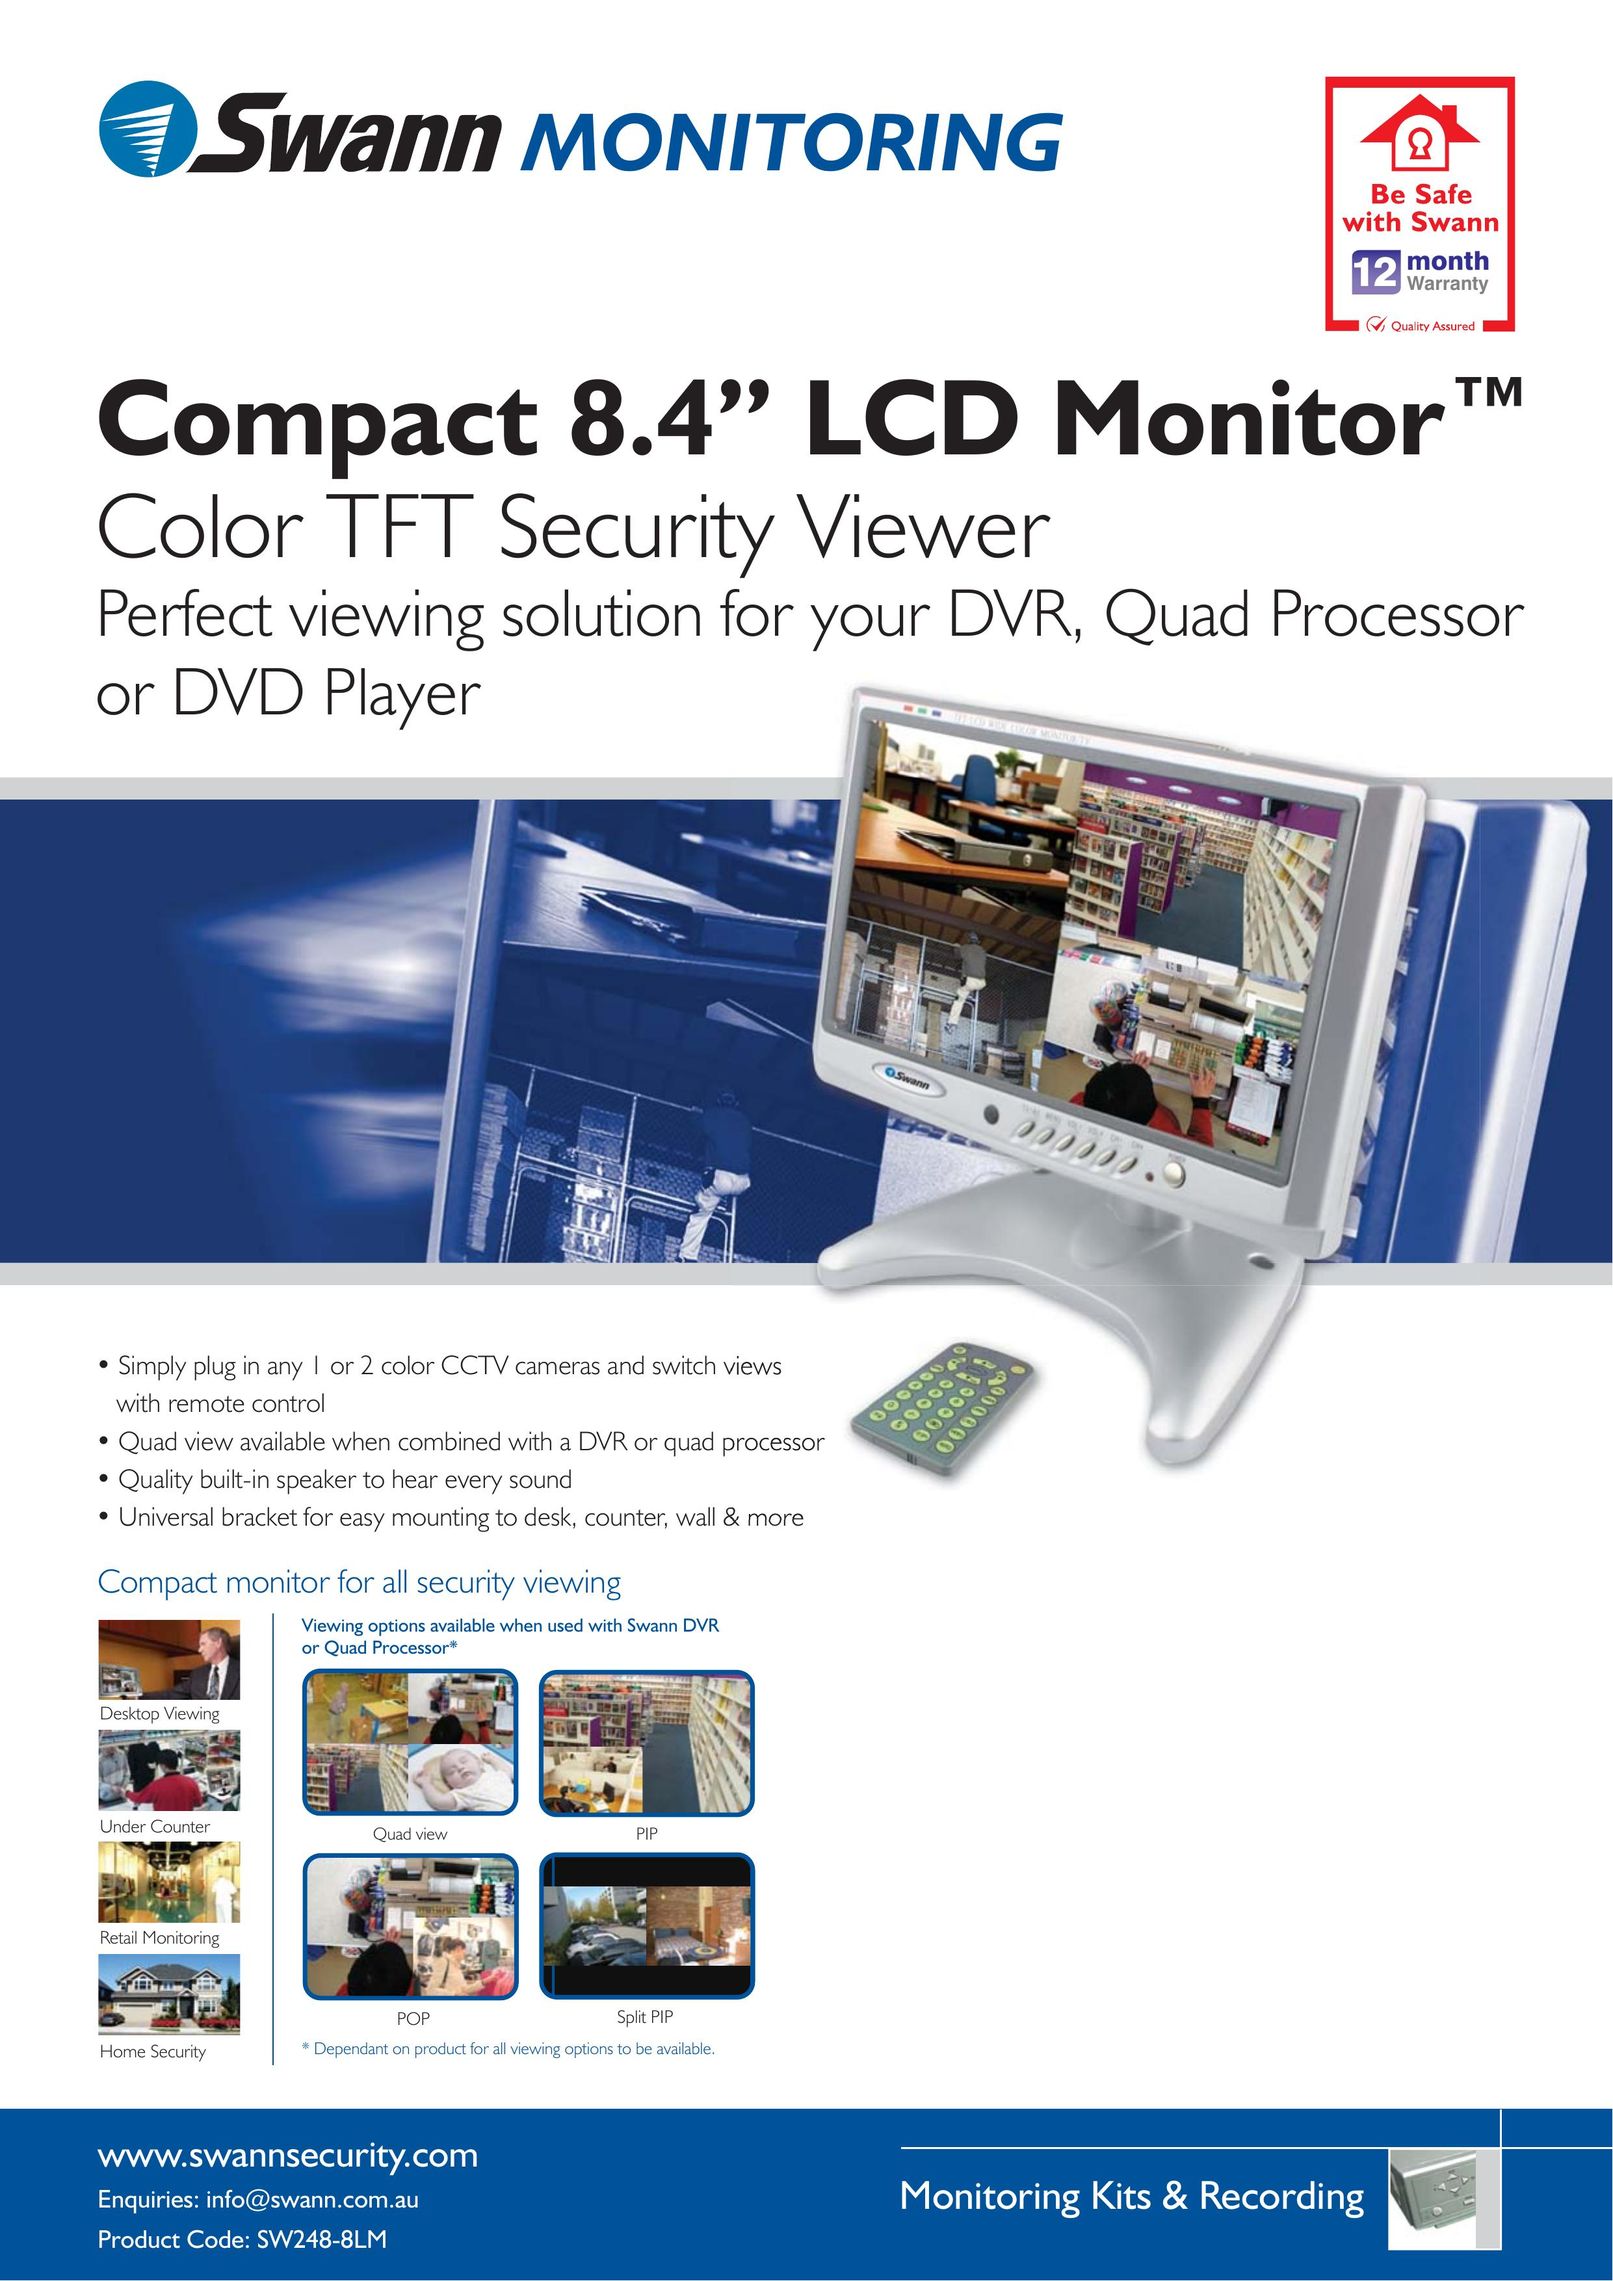 Swann SW248-8LM Computer Monitor User Manual